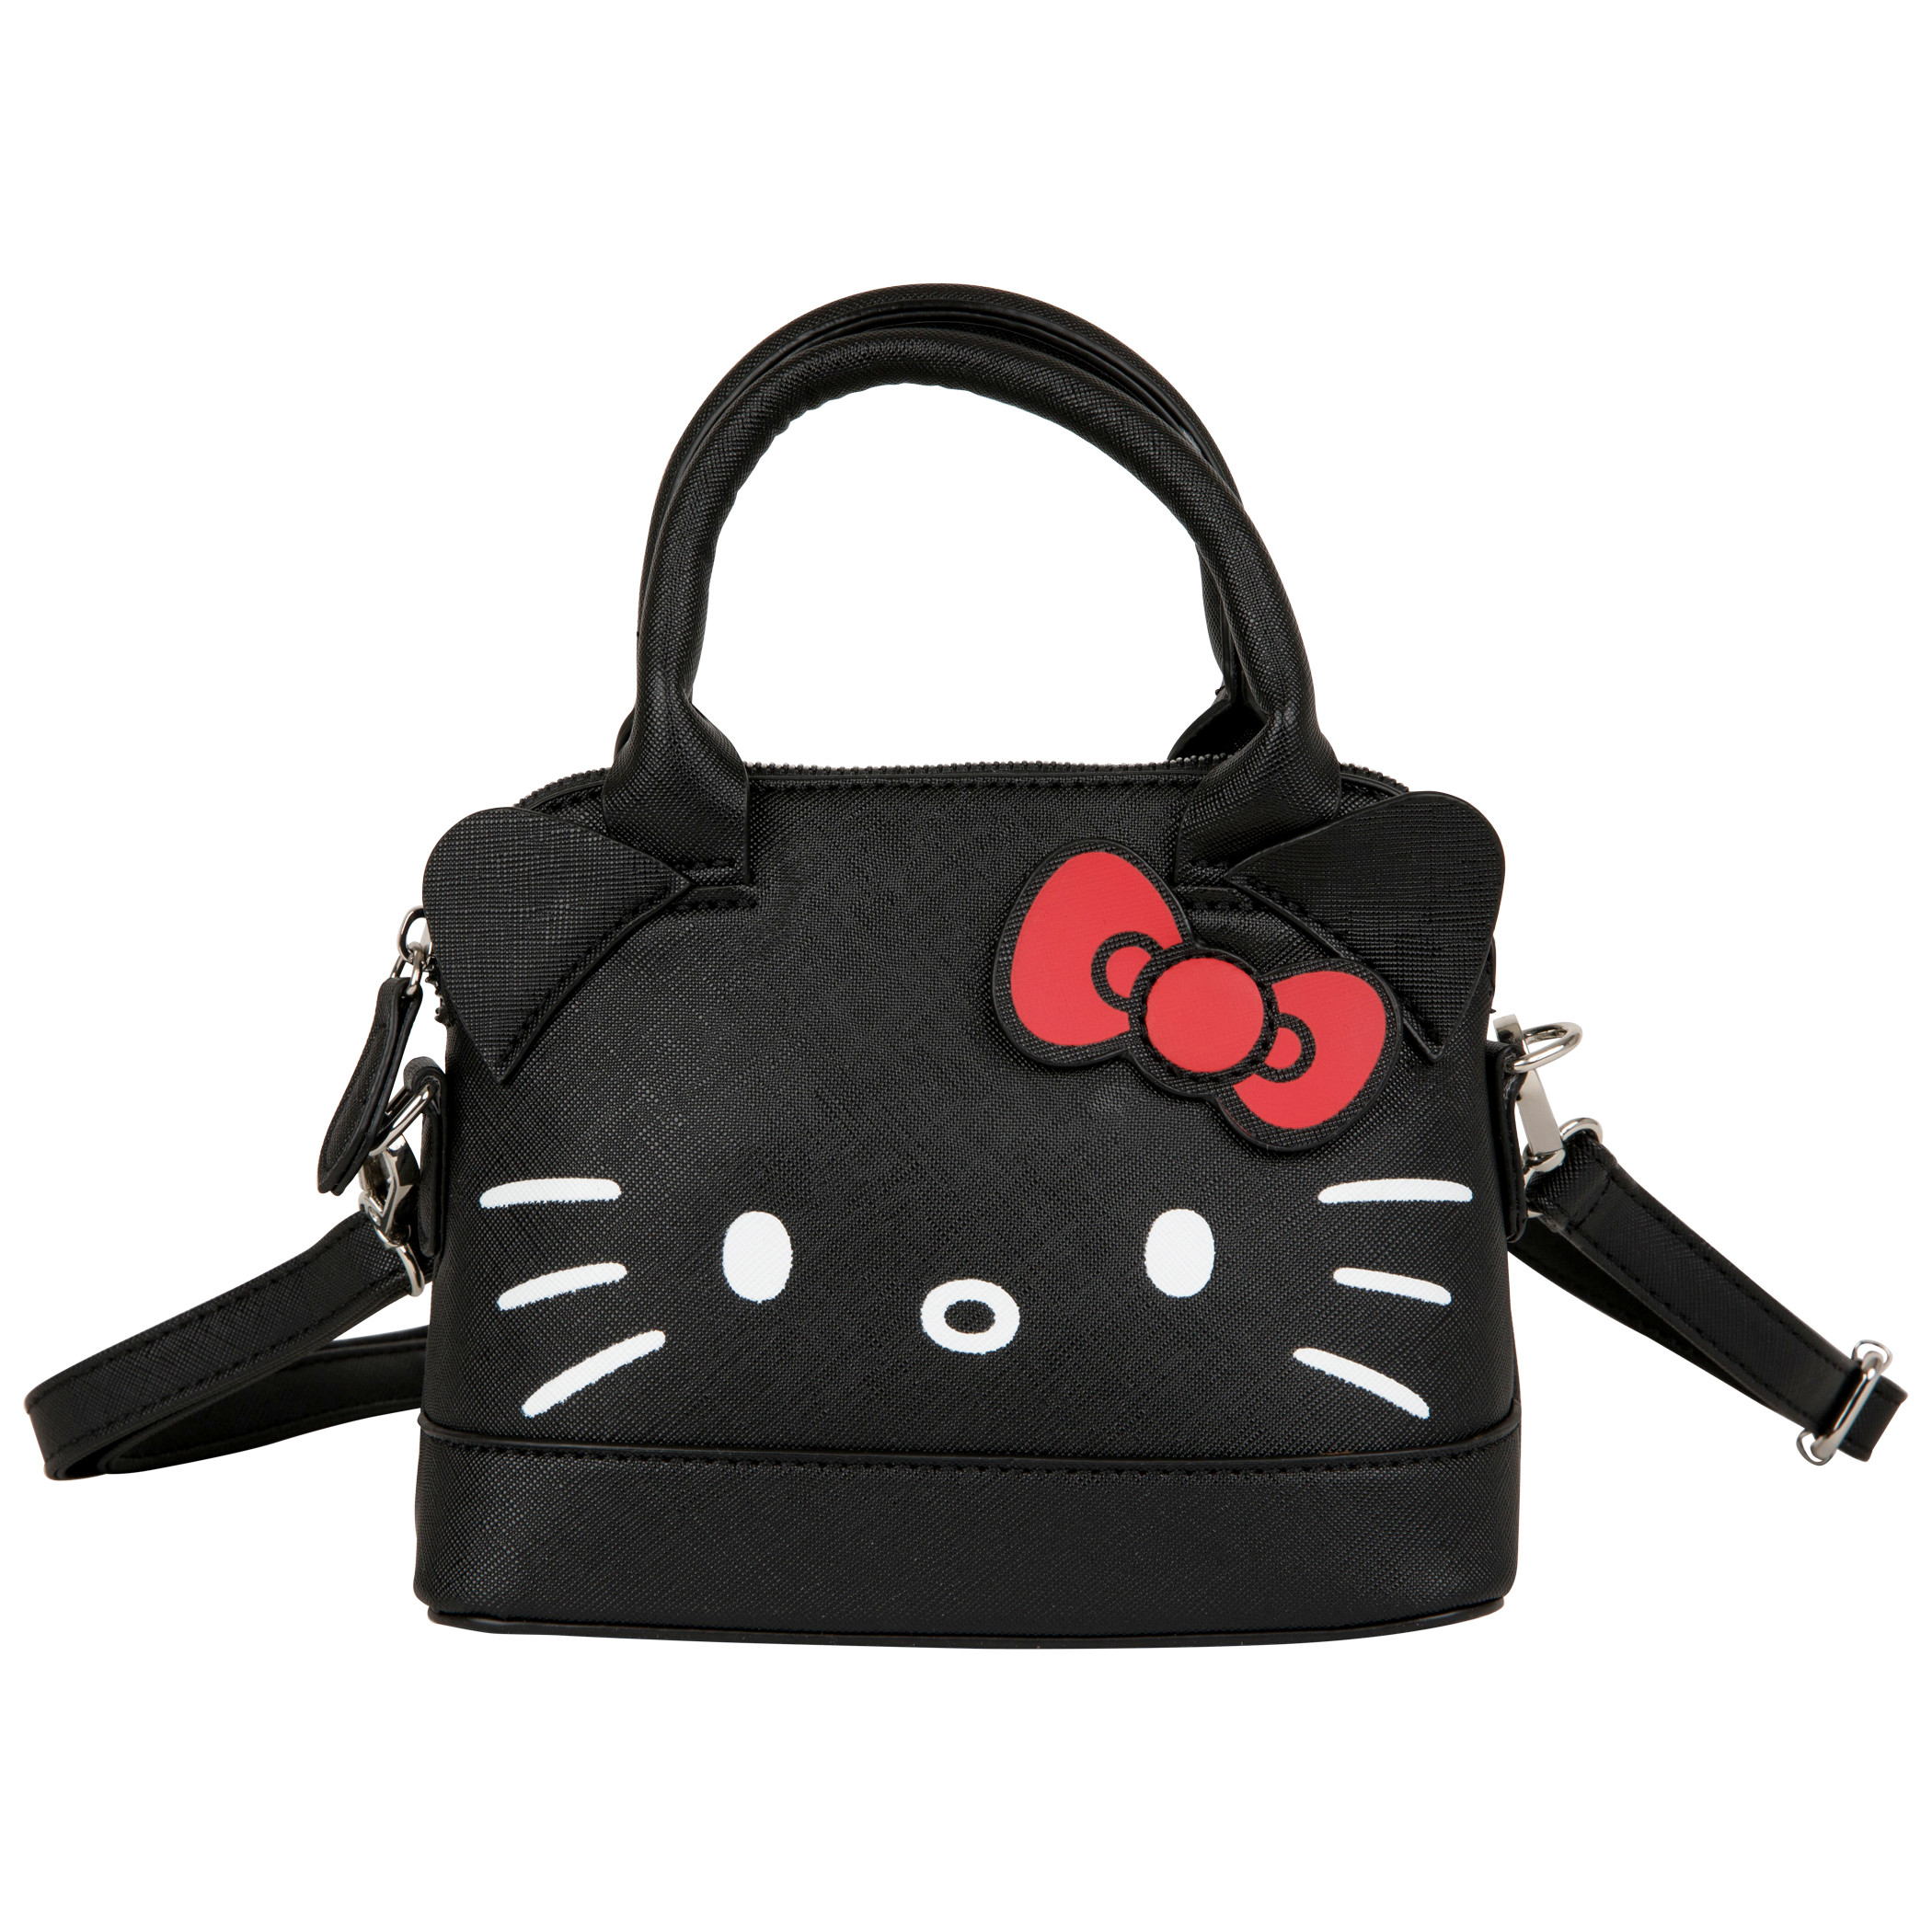 Hello Kitty Black Leather Hand Bag with Detachable Long Strap